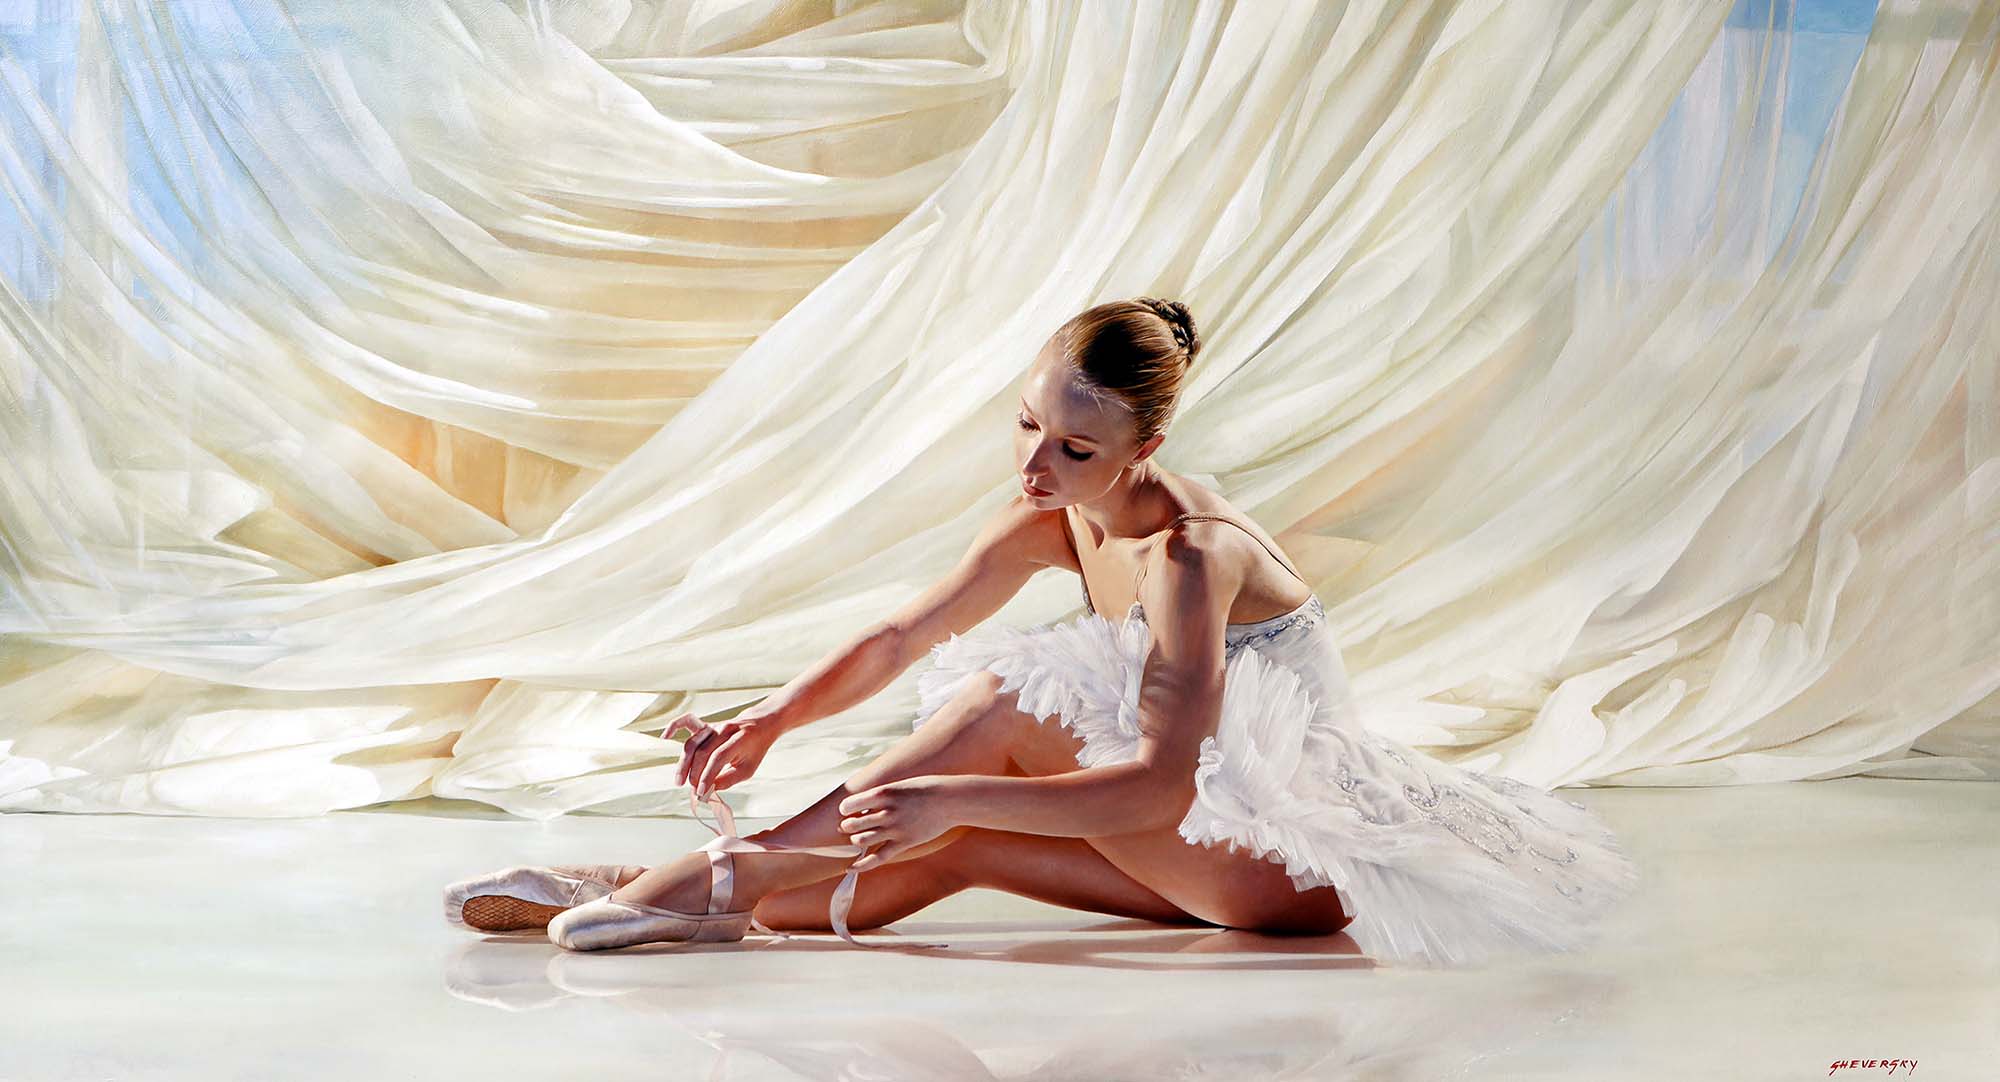 Contemporary art. Title: White Swan, Oil on Canvas, 40x72 inches by Canadian artist Alexander Sheversky.